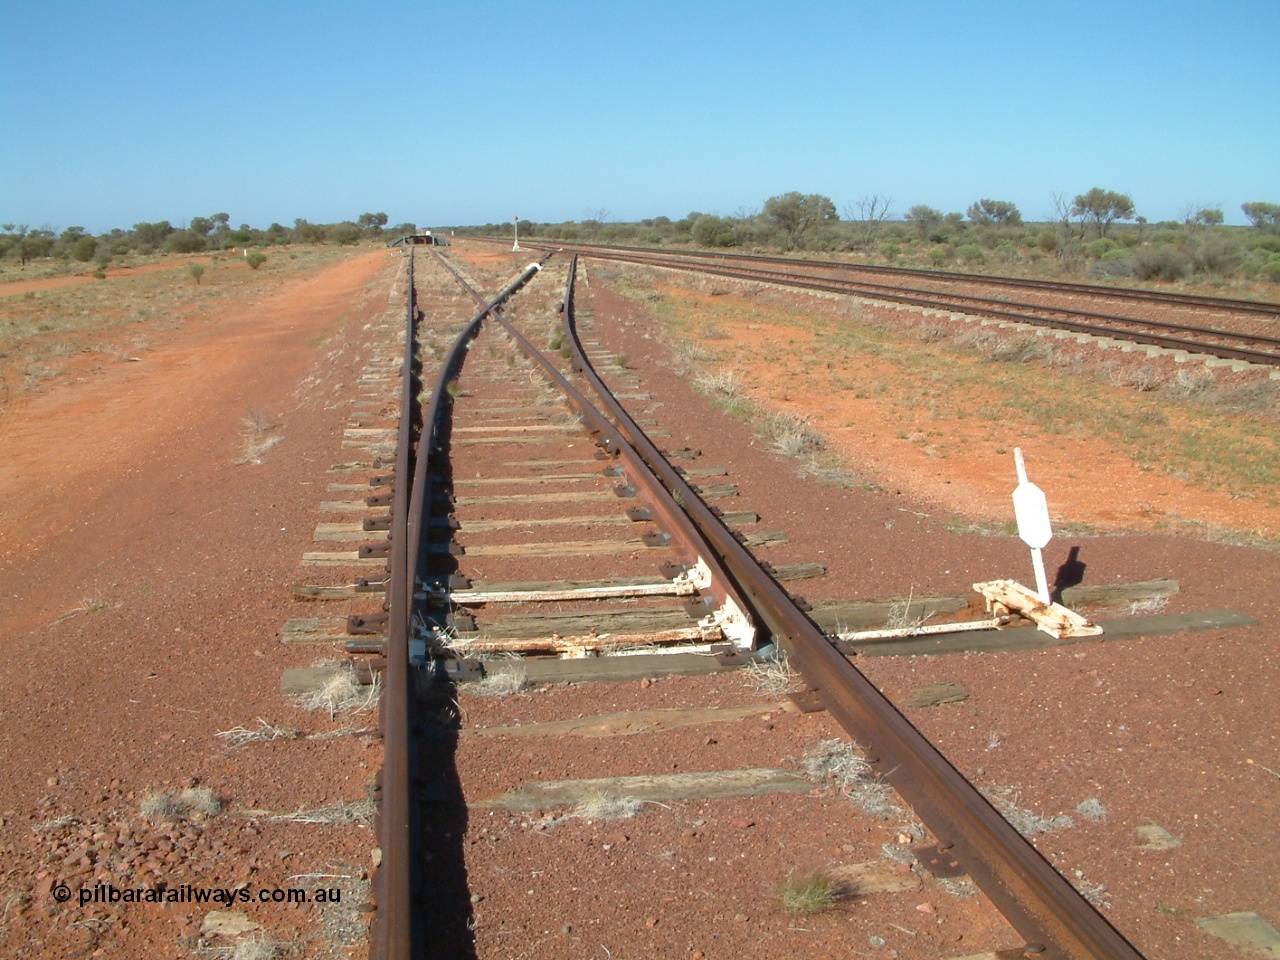 030416 094958
Wirrida Siding, looking south towards Tarcoola with the goods loop returning to the loop and the loading ramp and siding points. Located at the 641 km from the 0 datum at Coonamia and 137 km north of Tarcoola between Carnes and Manguri on the Tarcoola - Alice Springs line. [url=https://goo.gl/maps/CNUy7icETwEEQPgq7]GeoData location[/url]. 16th April 2003.
